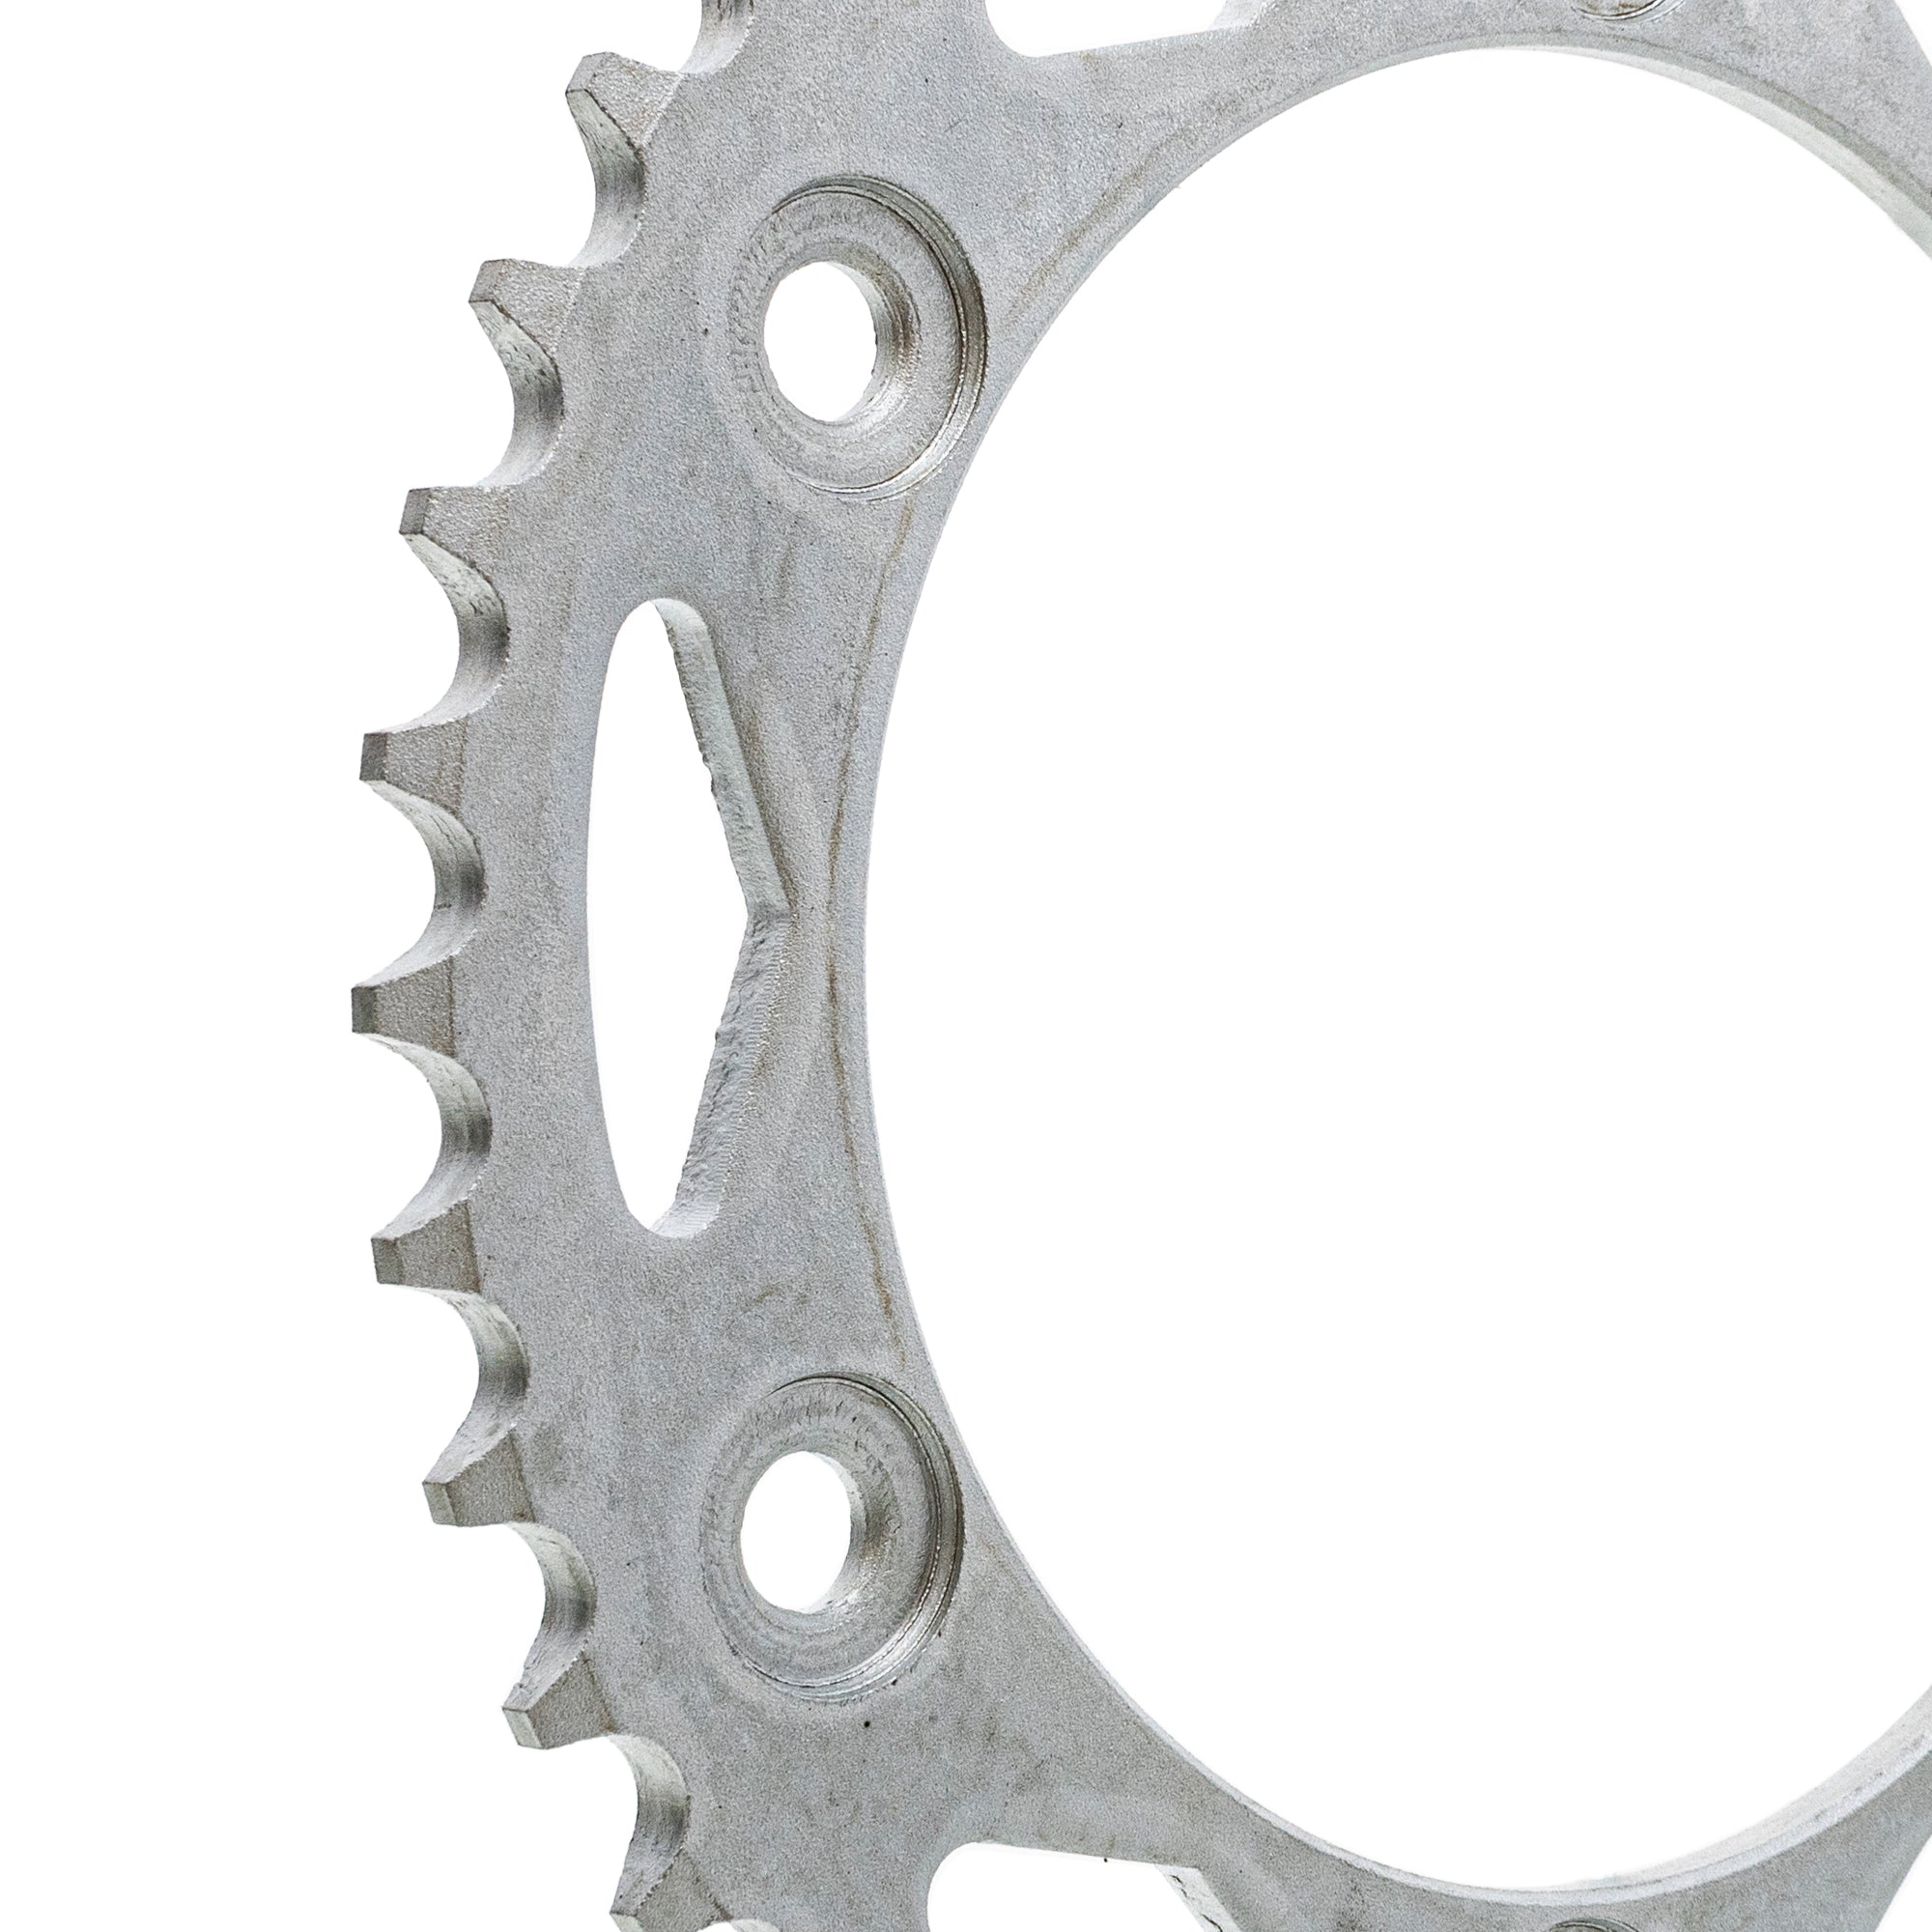 520 Pitch 41 Tooth Rear Drive Sprocket for Honda CBR1000RR Chain